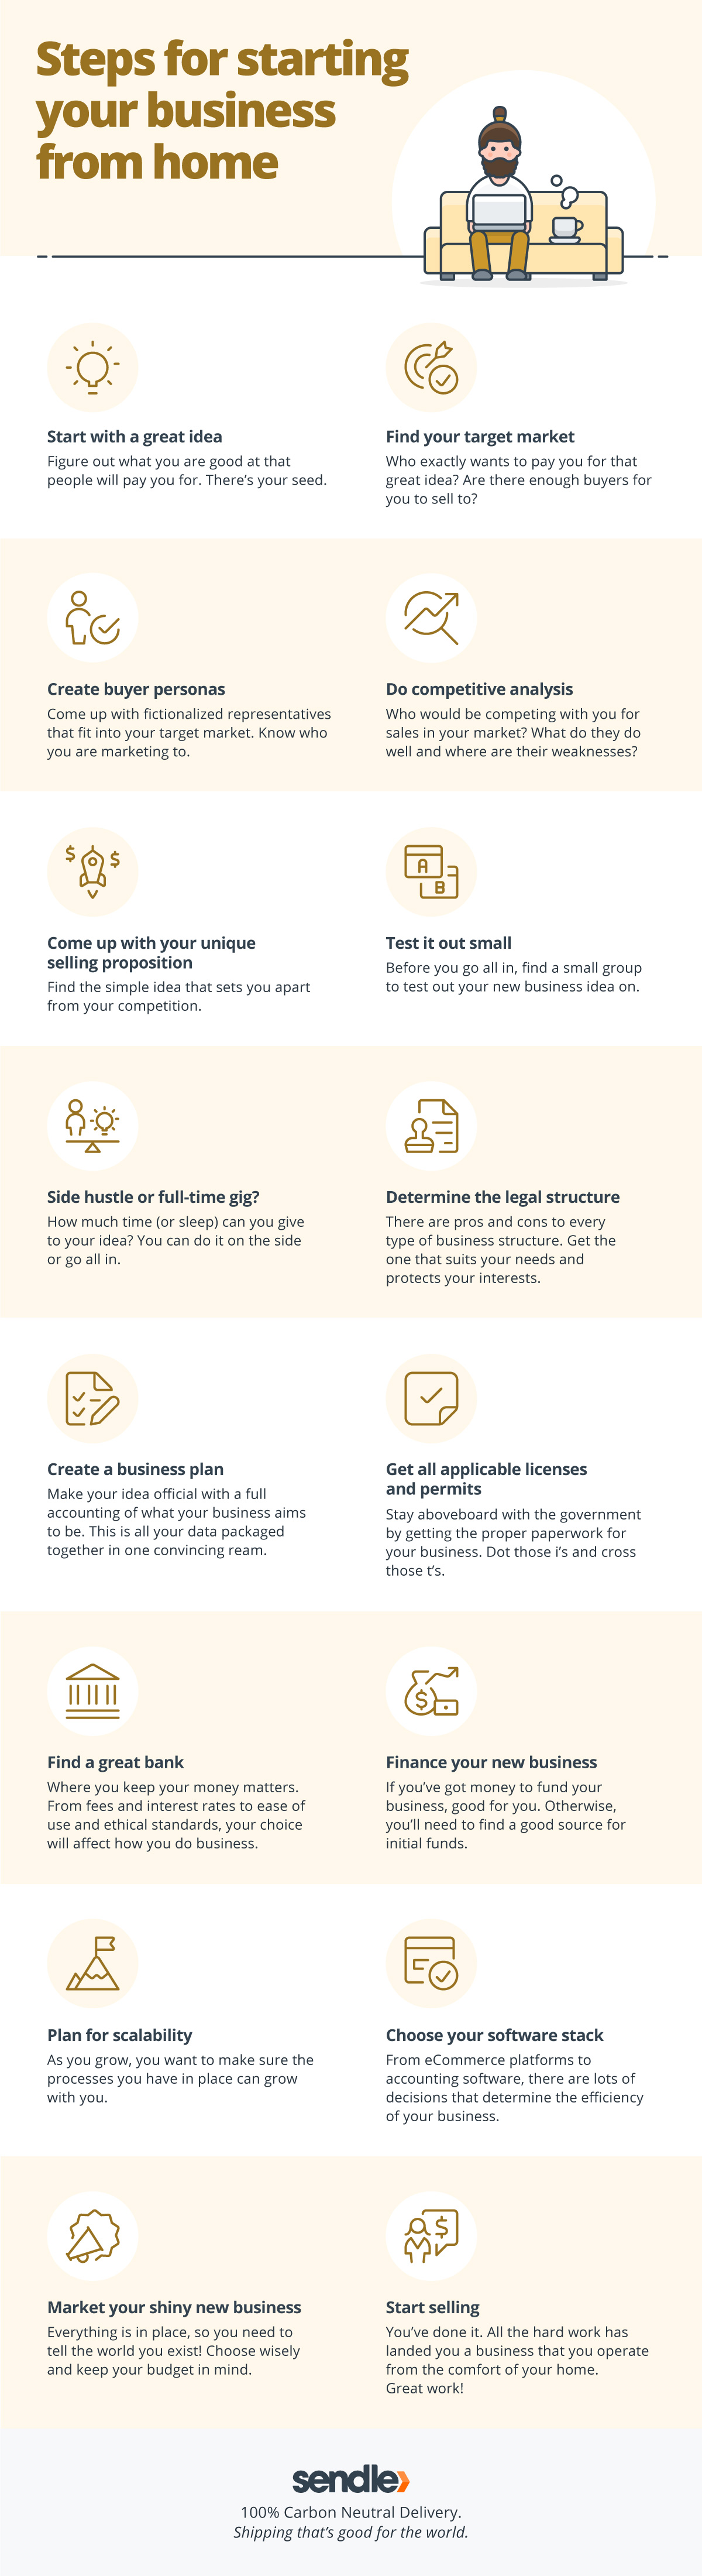 How to start your small business at home (with infographic)